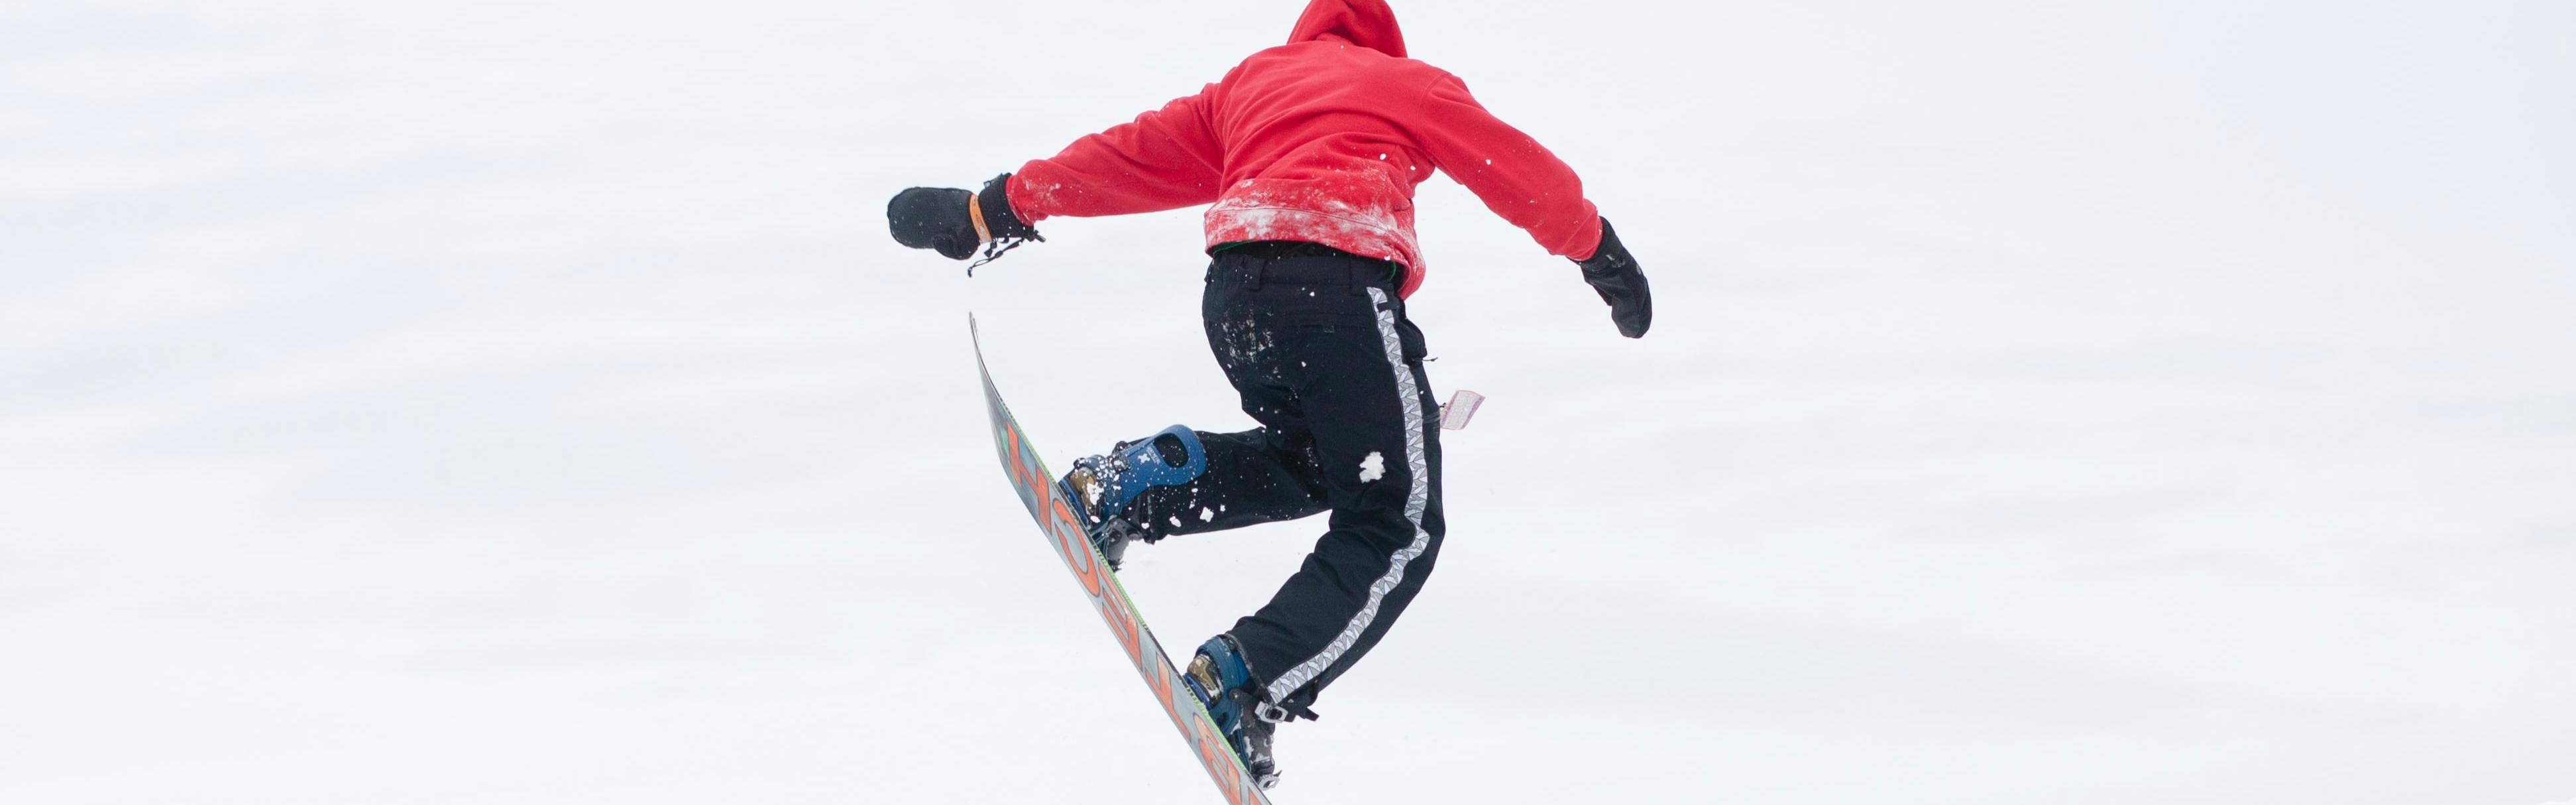 Snowboarder in a bright red jacket and black snow pants flying through the air in a snowboard trick.